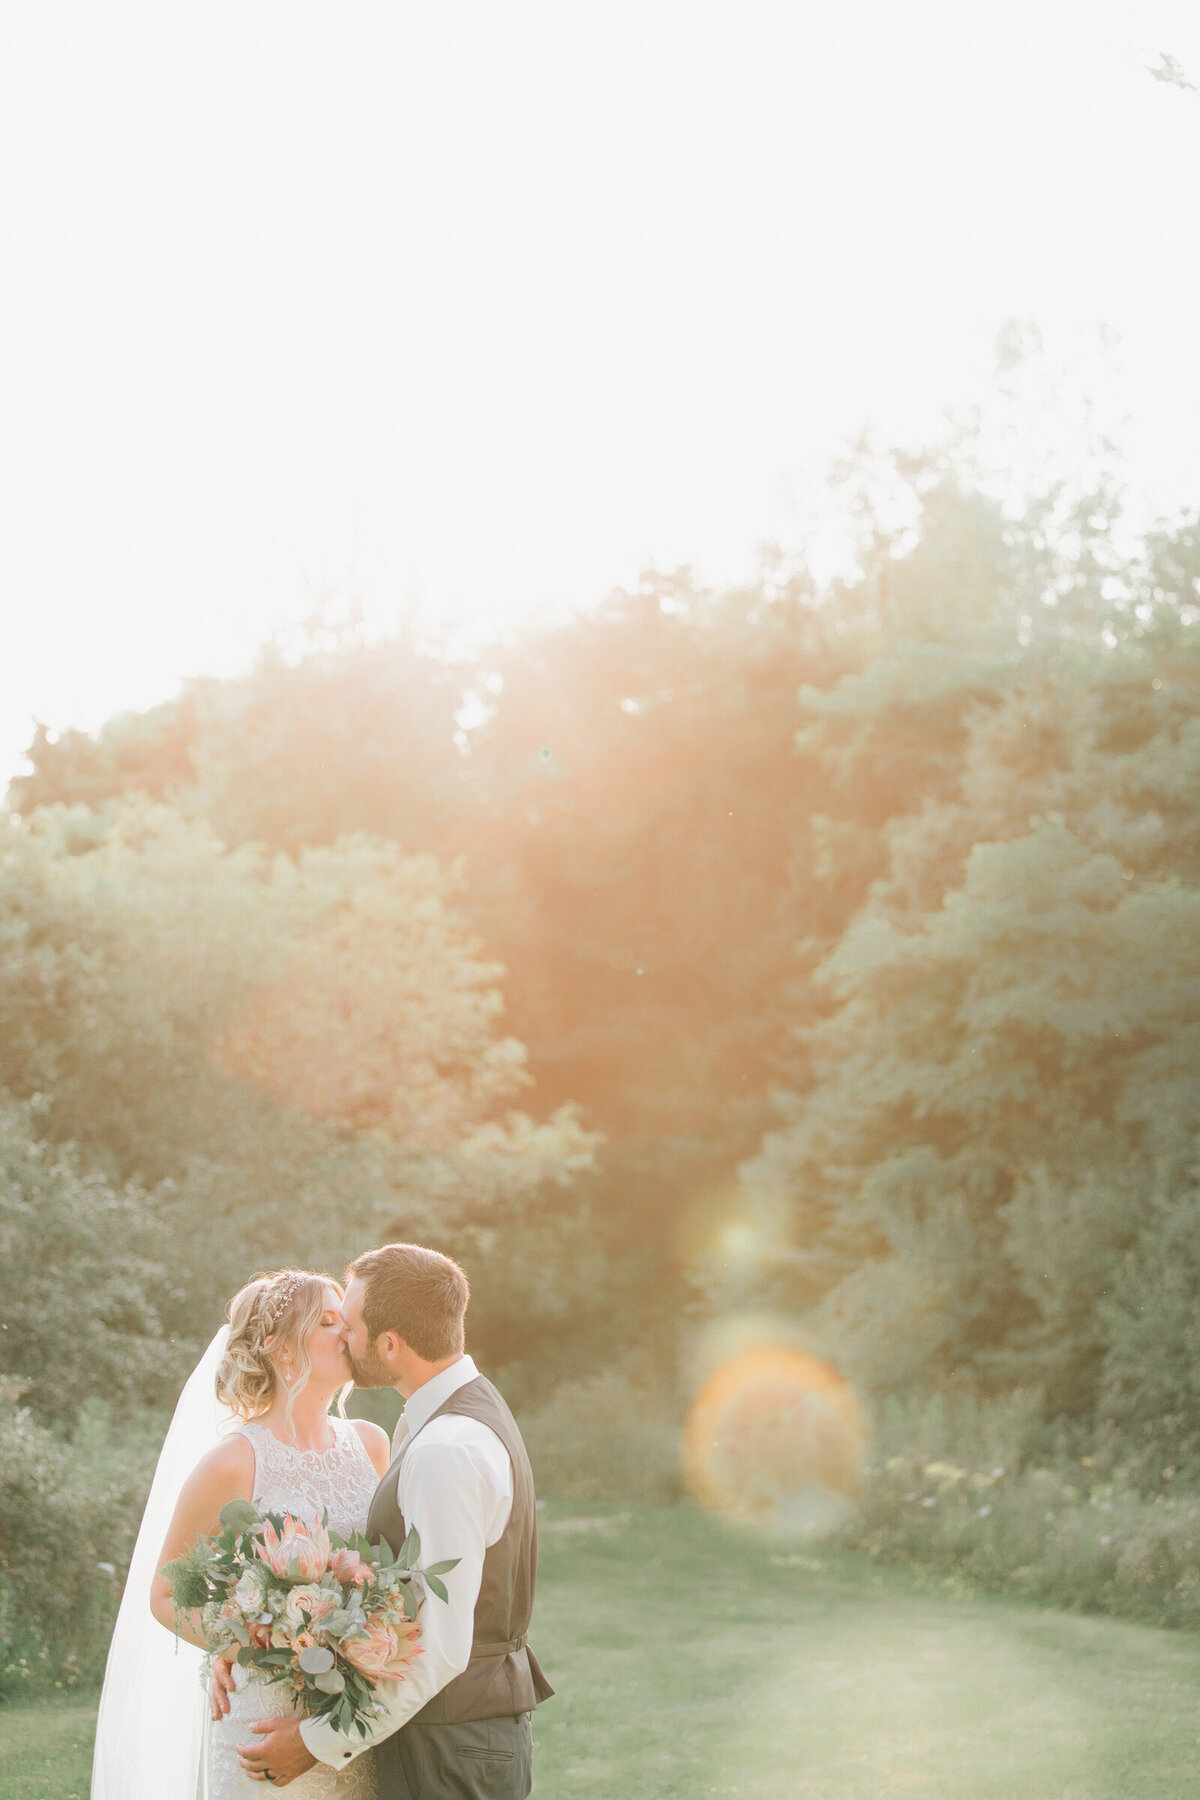 A bride and groom kissing at sunset